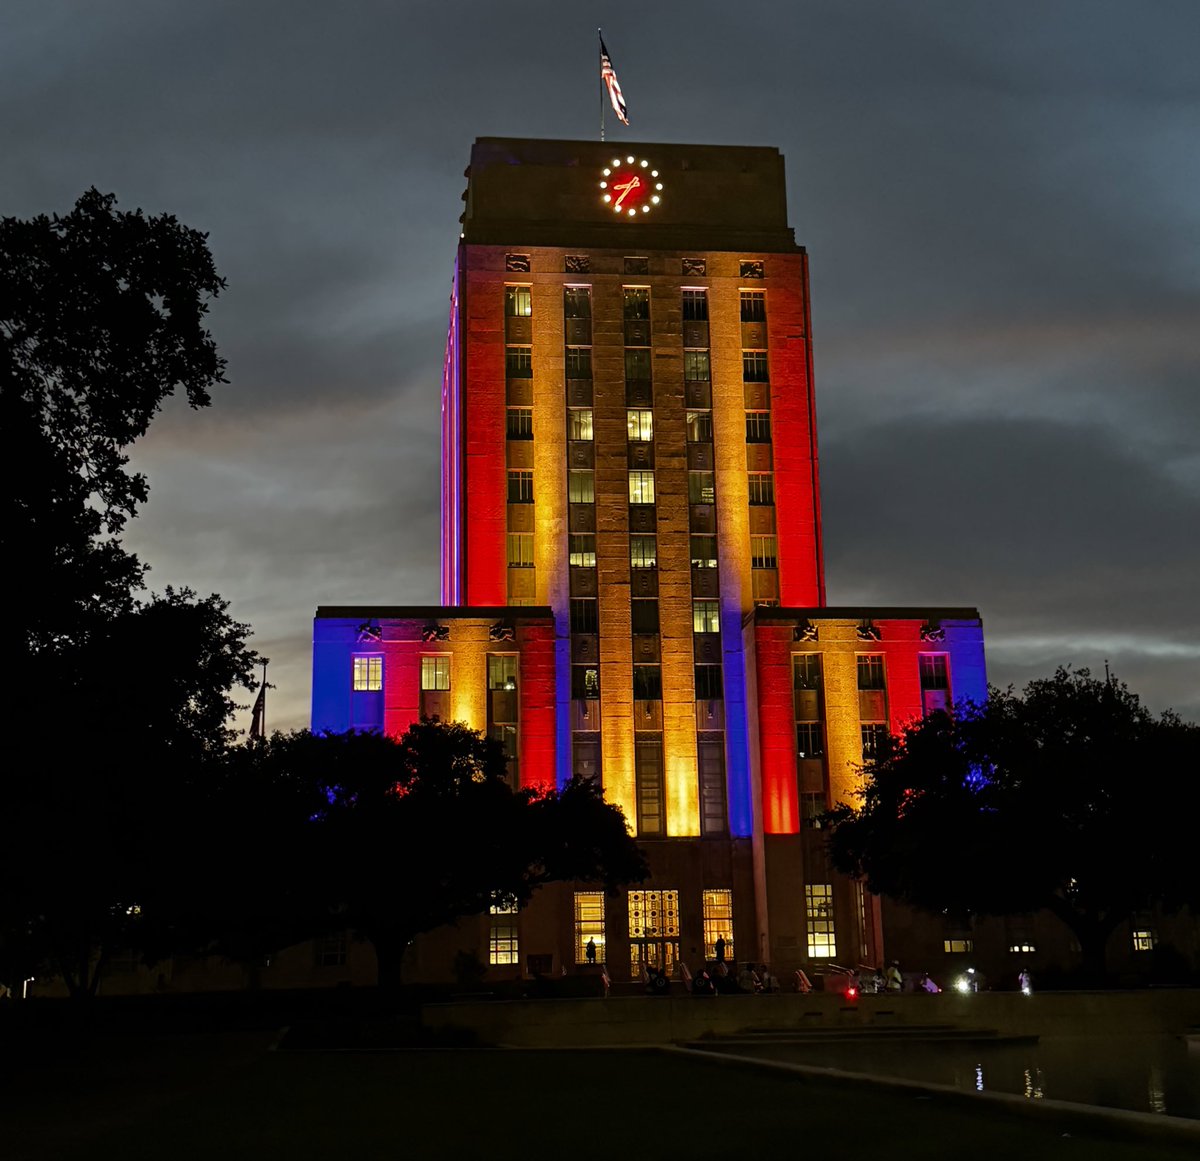 Honoring an icon. Tonight, our city hall lights are red, blue and gold, the colors of the @WheelerAvenueBC logo designed by founding pastor, Rev. William A. Lawson, who died Tuesday. @houmayor Whitmire asked for the lights to be turned on nightly to honor Rev. Lawson’s life and